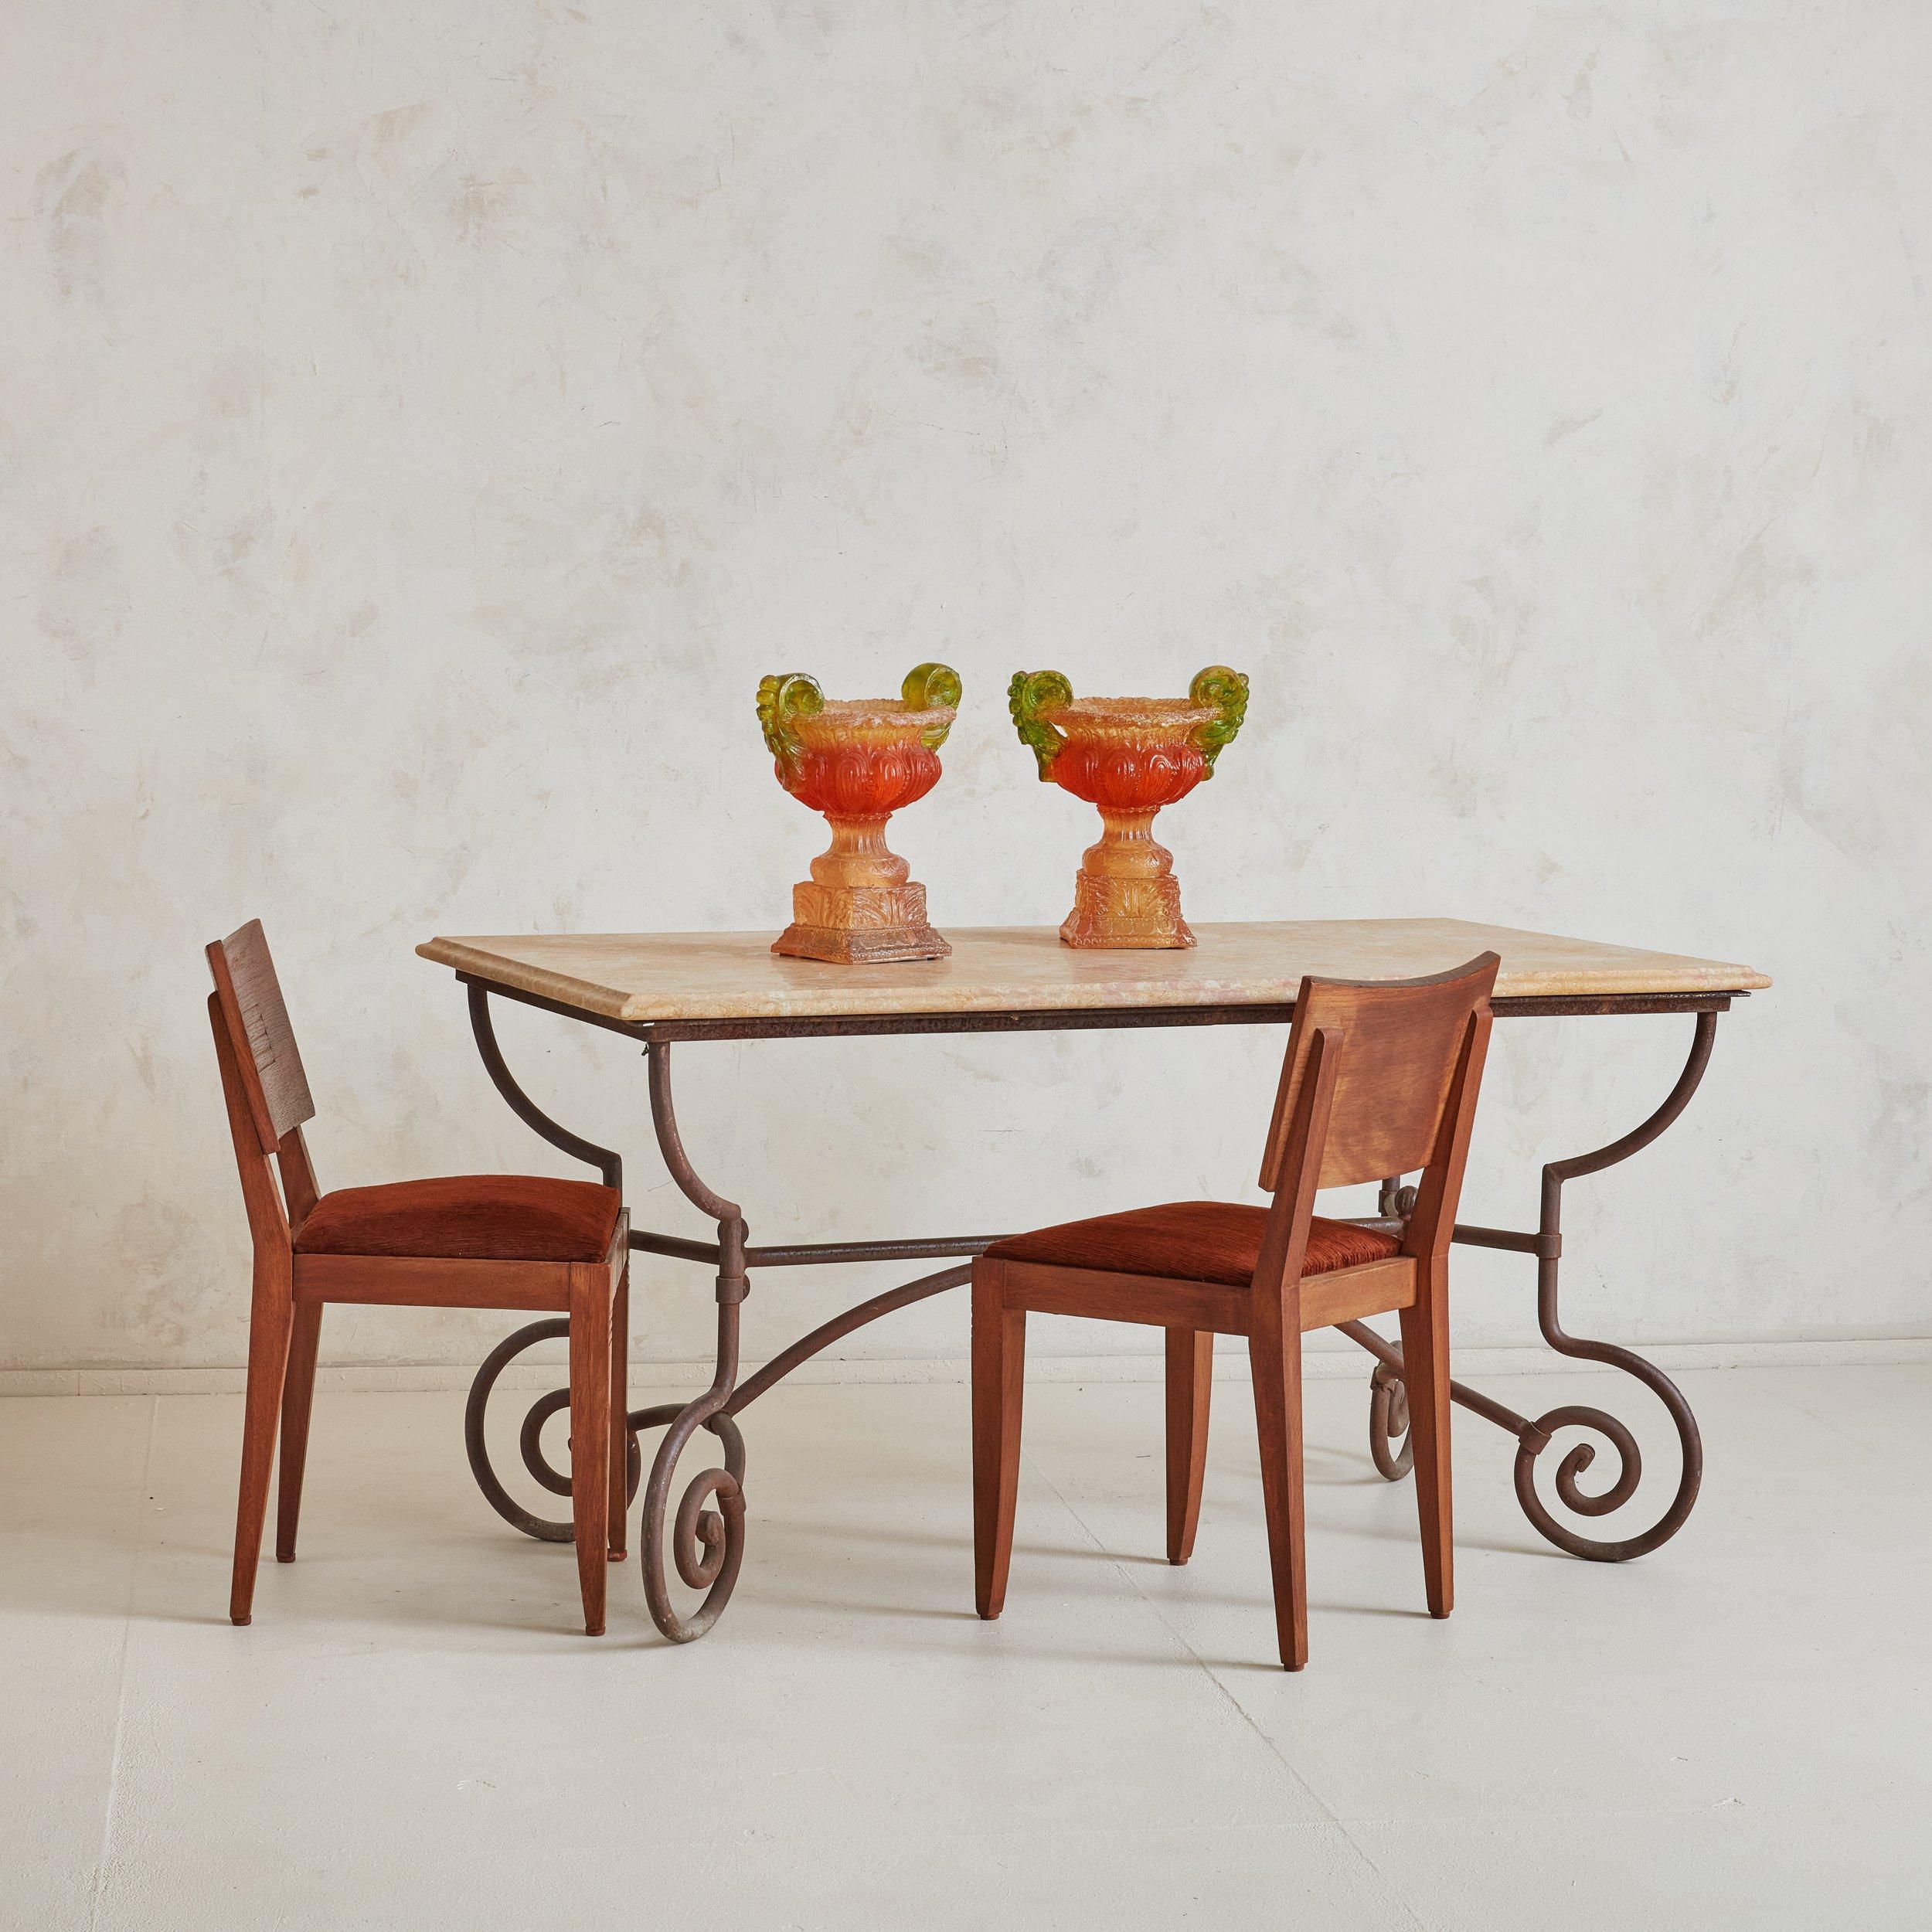 A gorgeous and classic dining table or occasional table from the South of France. The wrought iron base is one of our favorite materials and this table features a beatifully forged curved base. The marble table top we designed specifically to pair